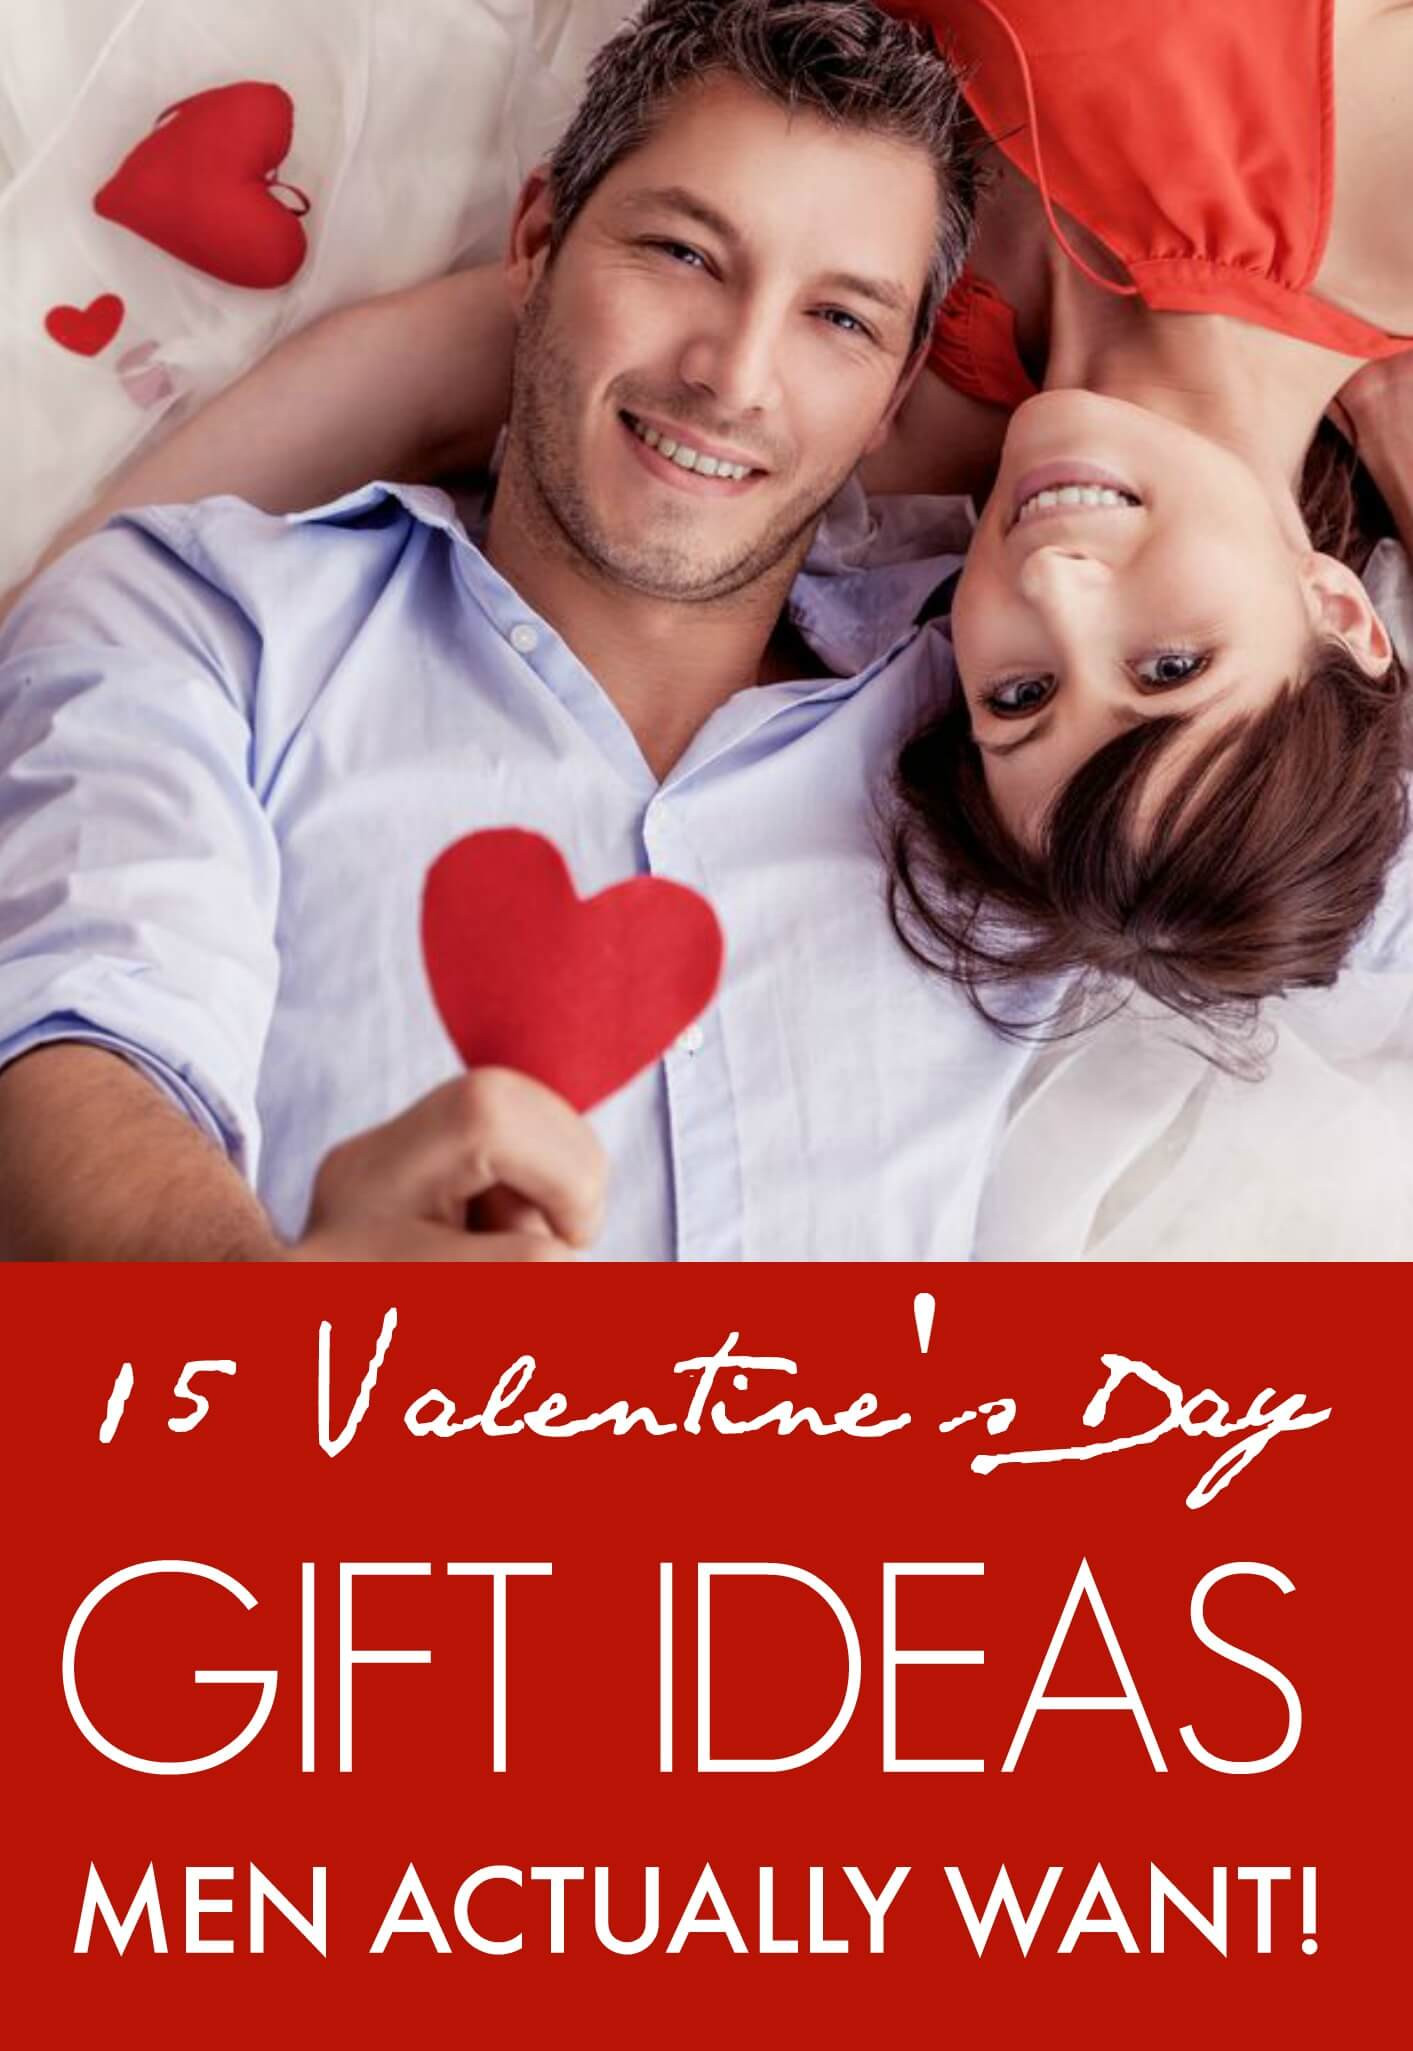 Valentines Day Gifts For Men
 15 Valentine’s Day Gift ideas Men Actually Want